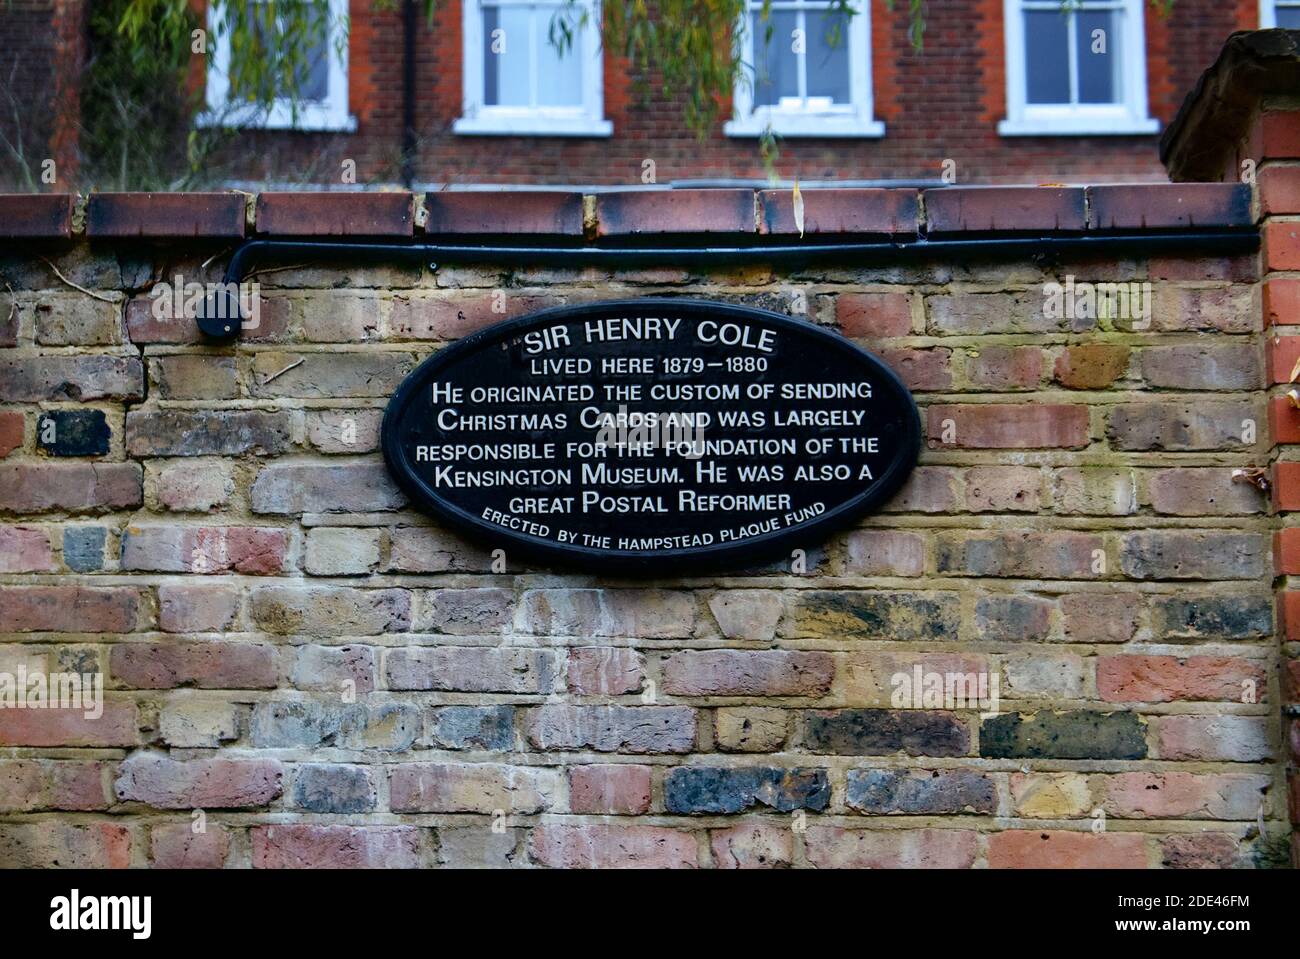 Sir Henry Cole, inventor of Christmas cards and post reformer, plaque by Hampstead Plaque Fund dedicating where he used to live in Hampstead Village. Stock Photo